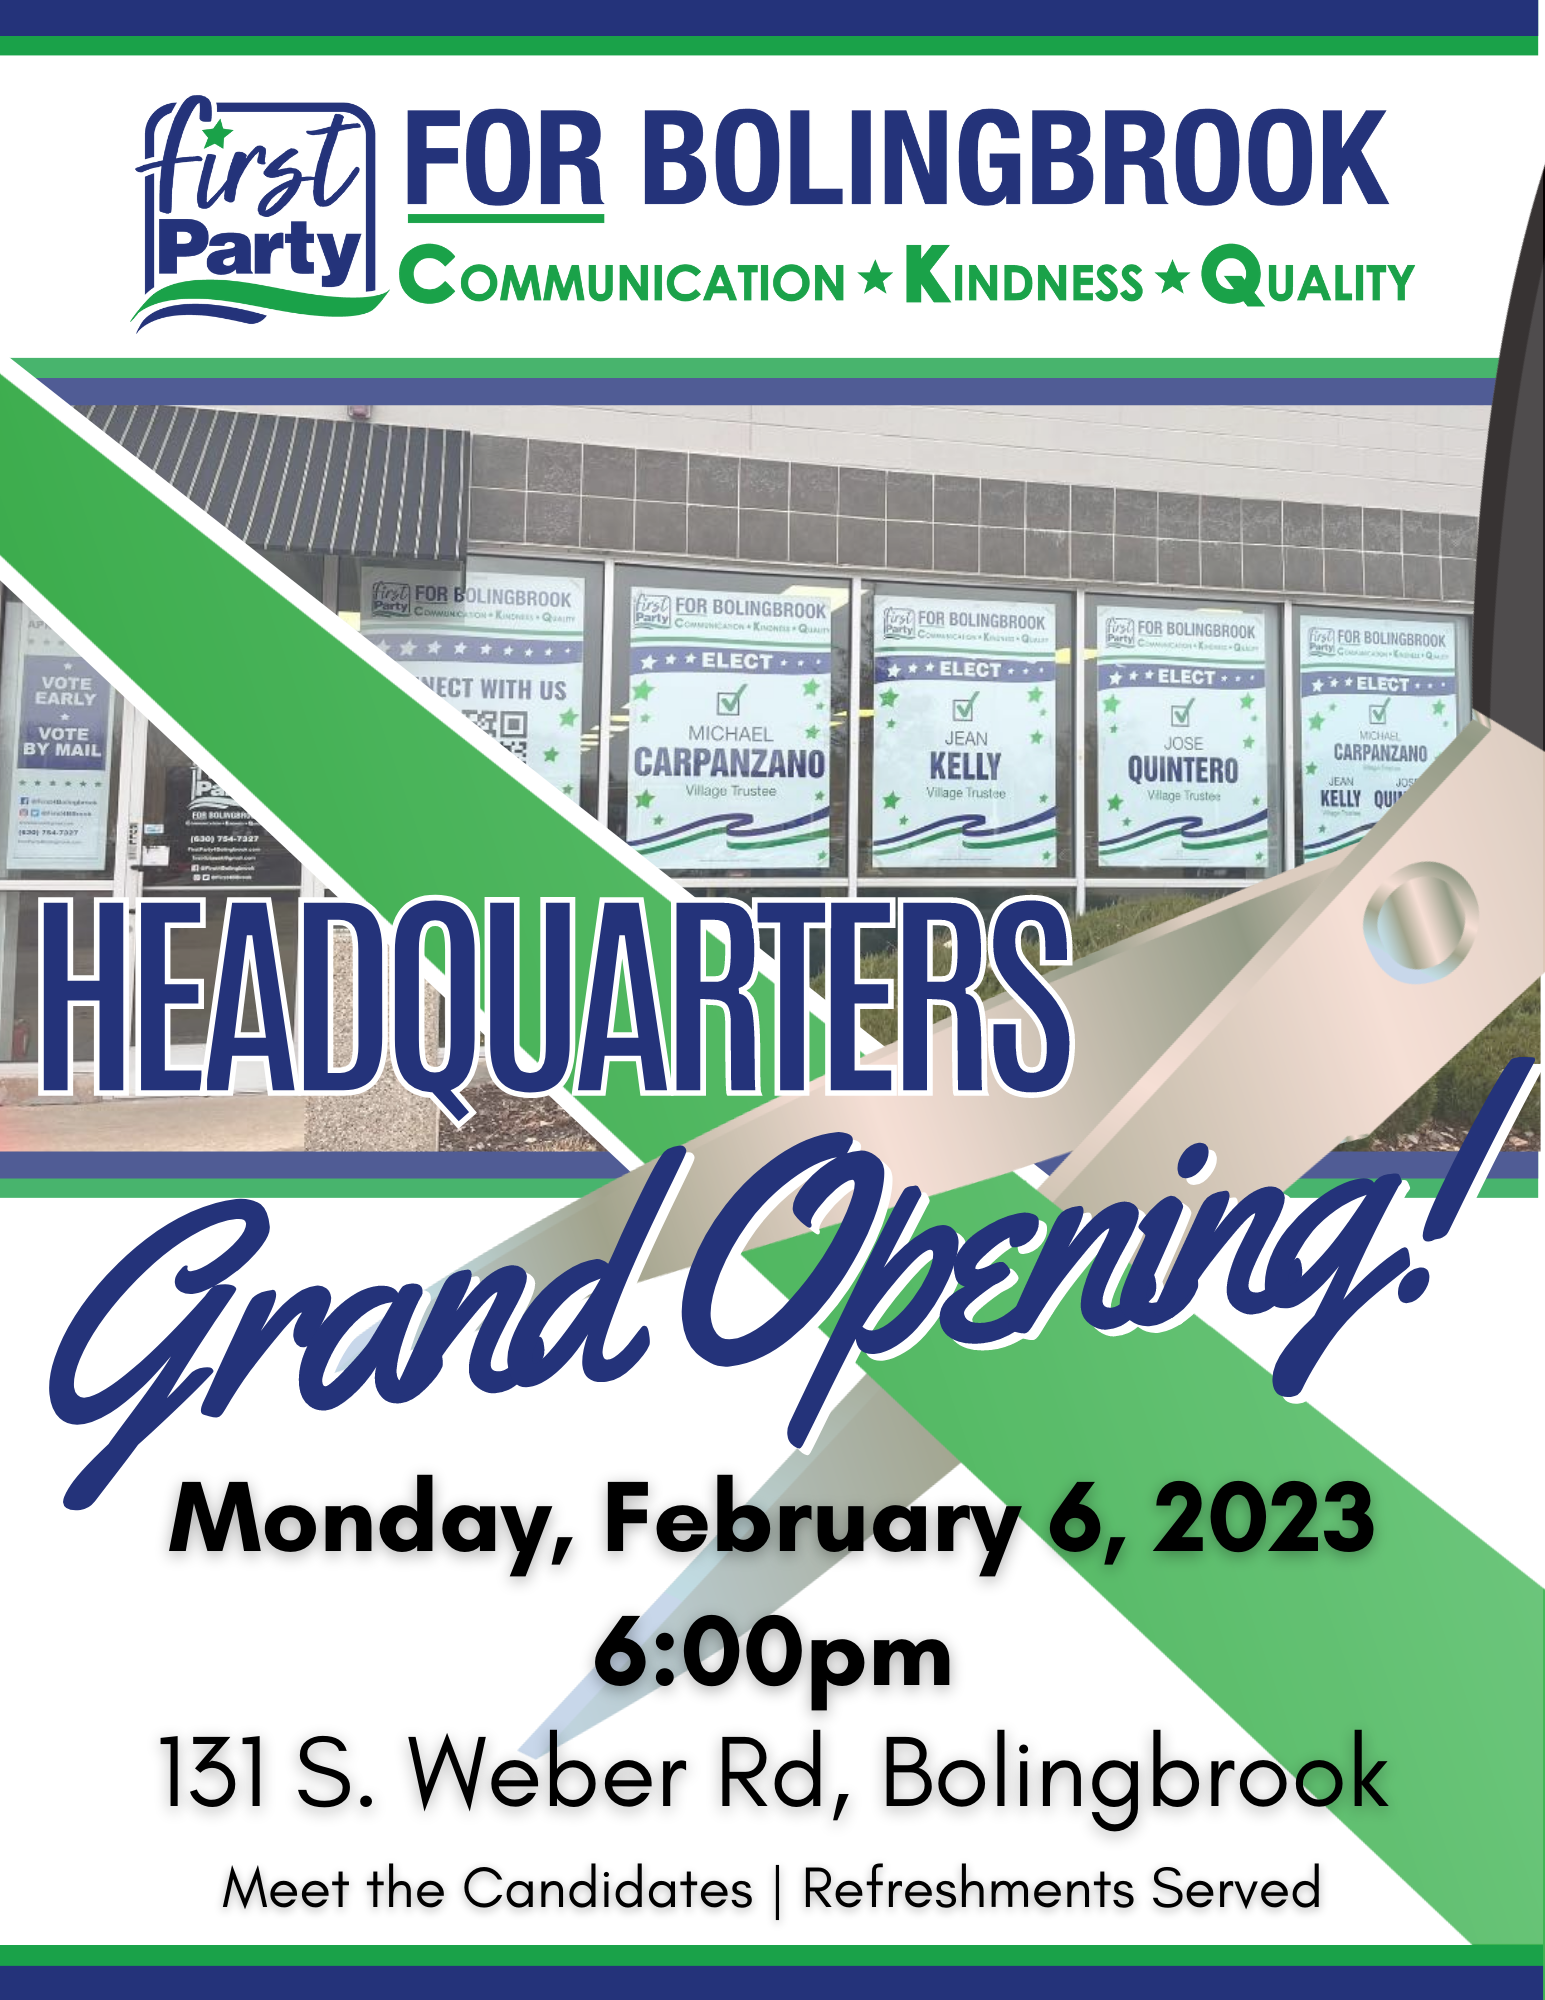 Campaign Headquarters Grand Opening